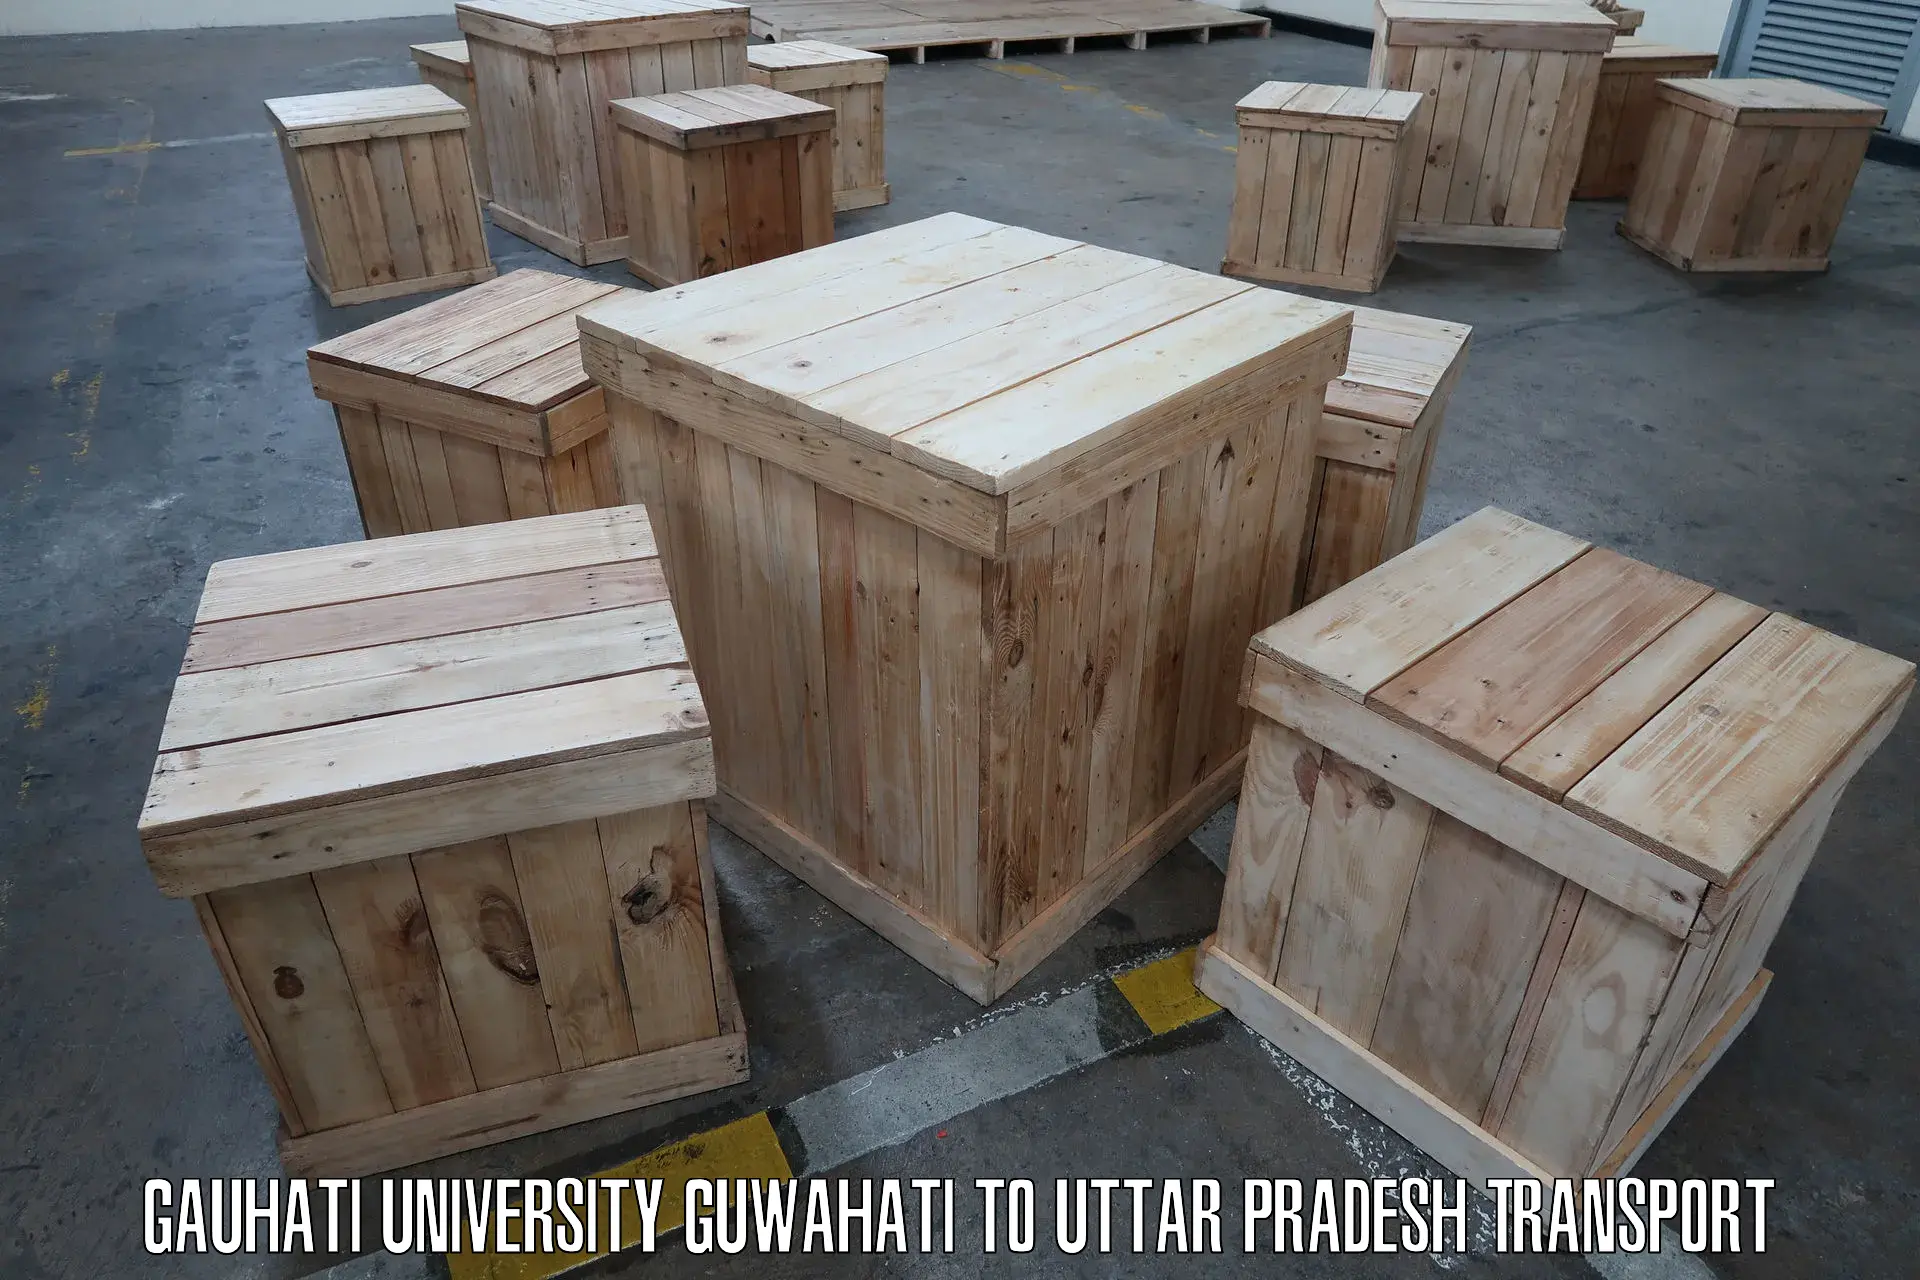 Container transport service Gauhati University Guwahati to Poonchh